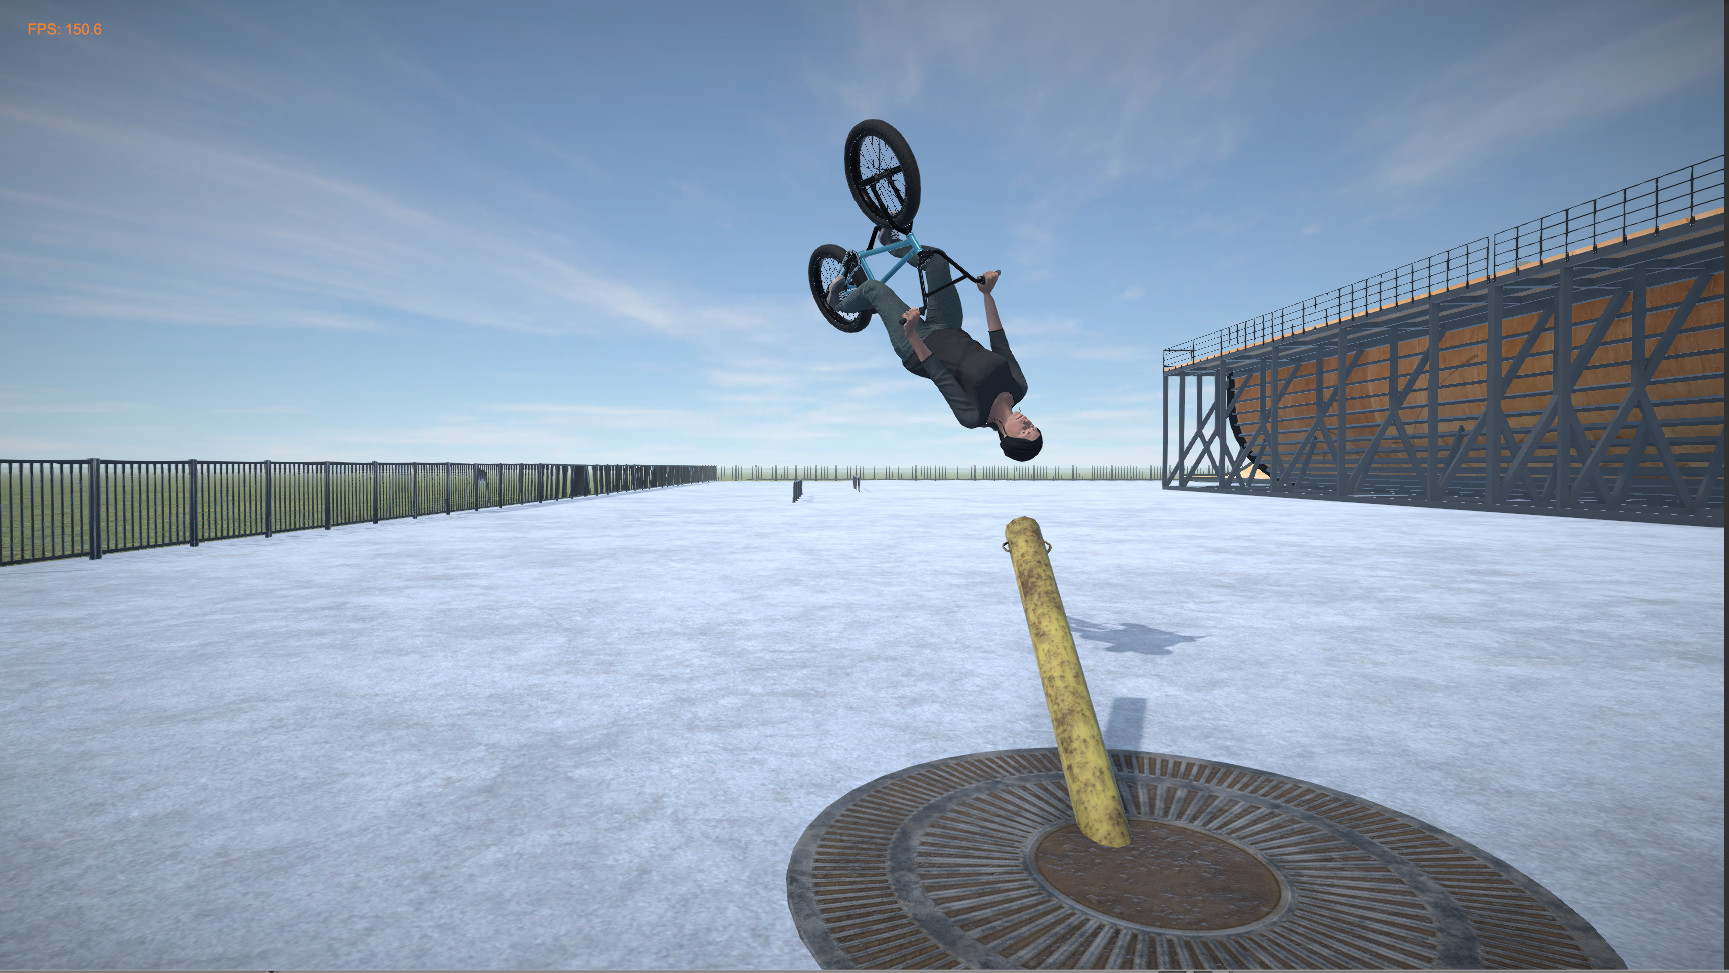 PIPE BMX Streets on Steam